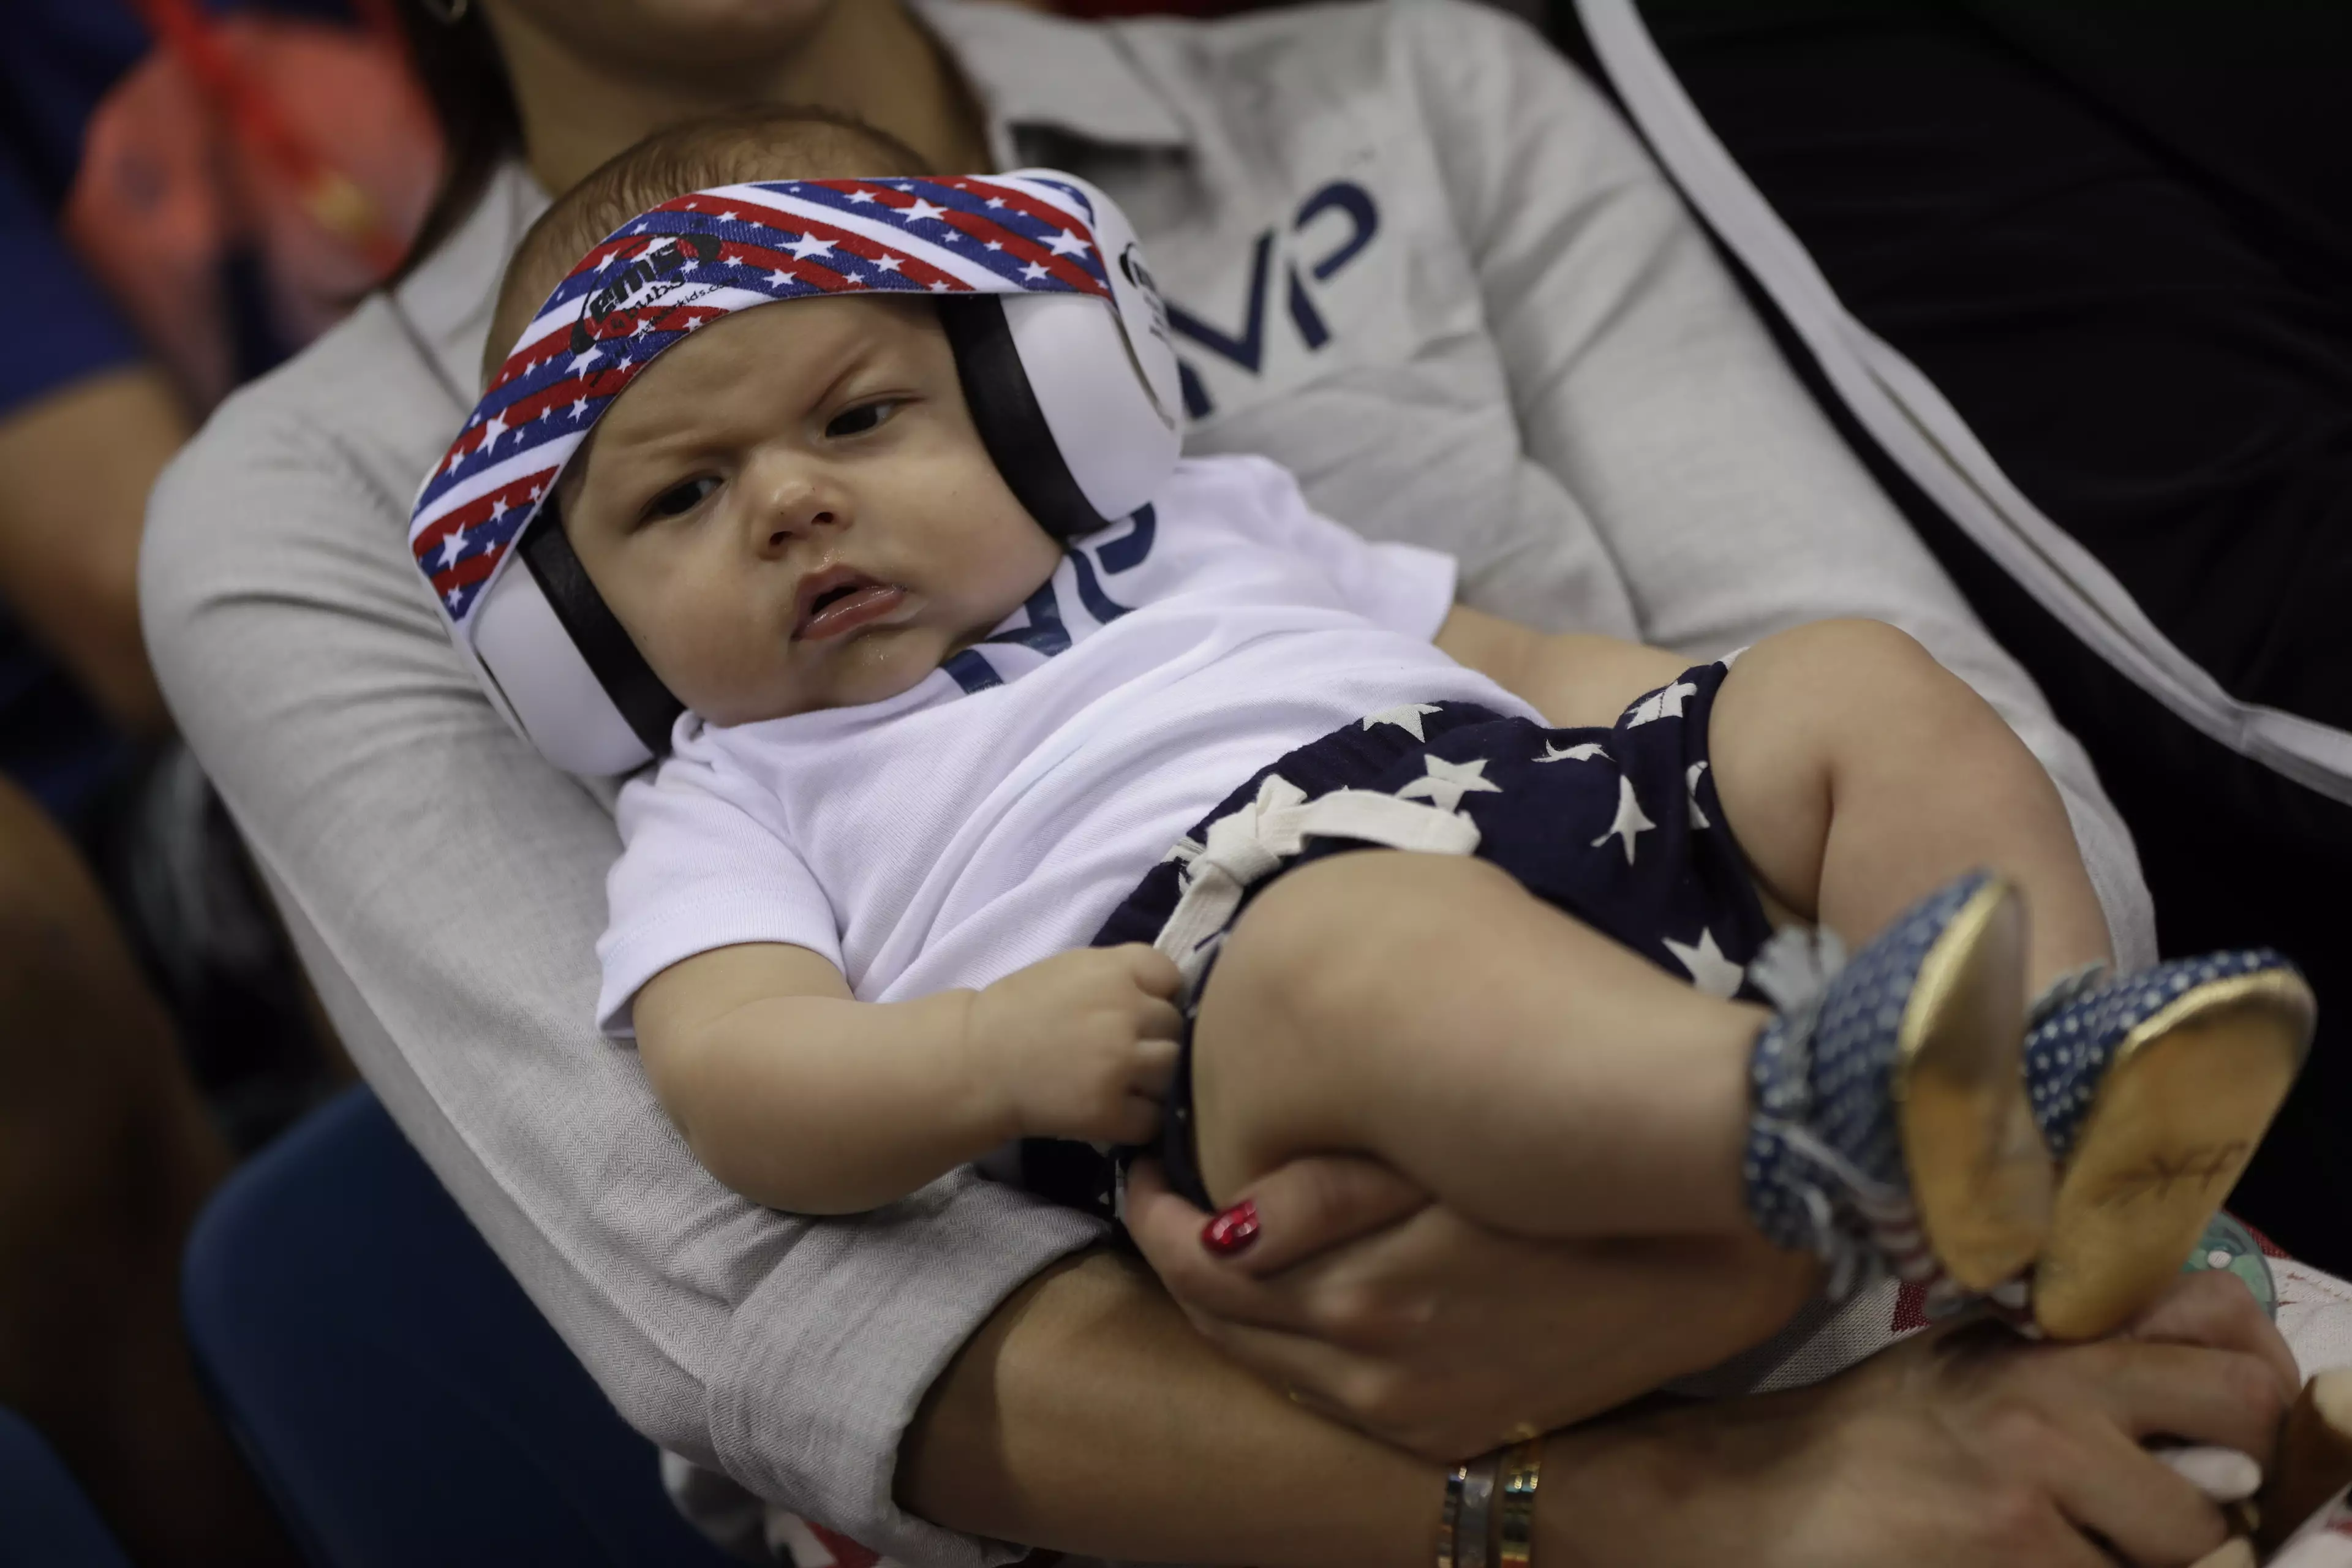 Boomer Phelps Wearing Earmuffs Steals The Show At The Olympics